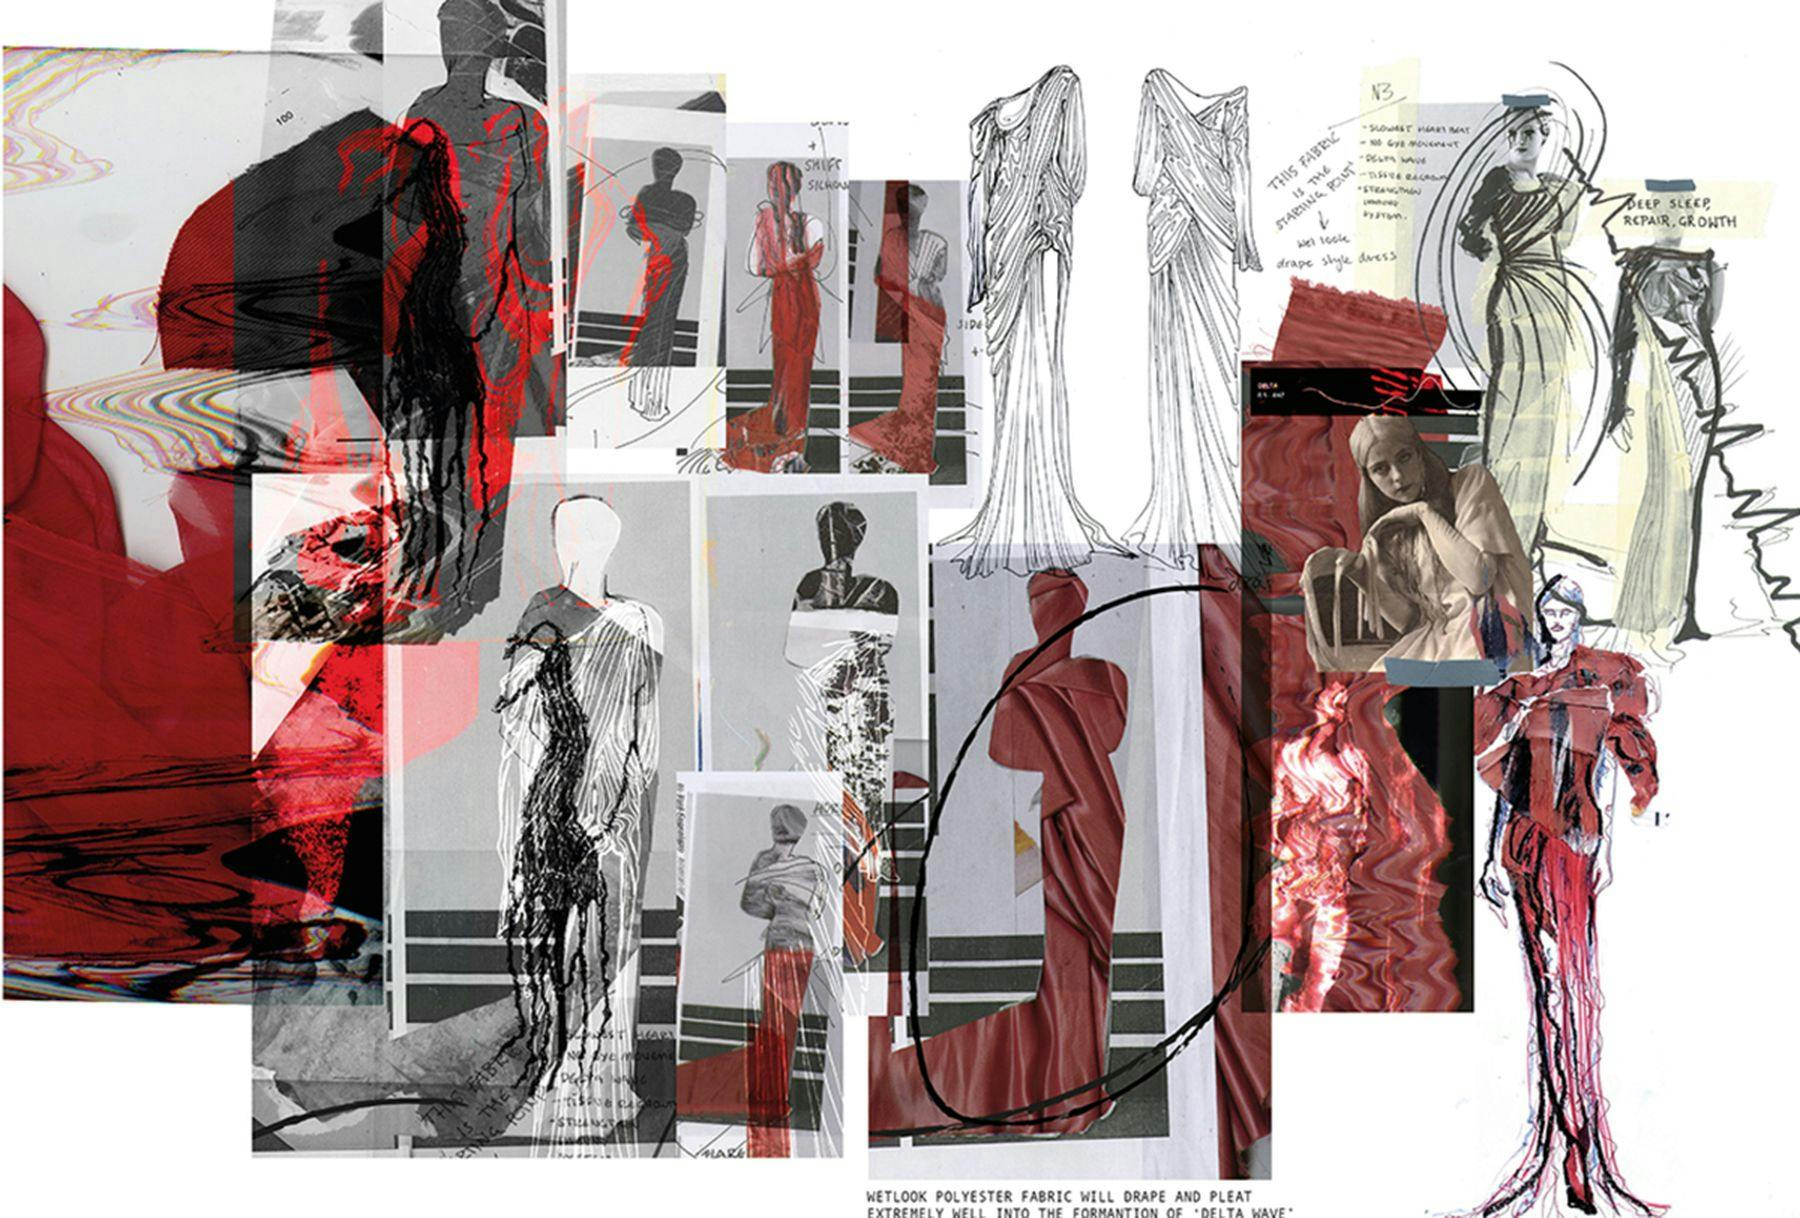 A collection of design images featuring pencil illustrations, colour sketches and photographs. The dresses are draped on the body, are shades of red and grey and consist of different fabrics including wetlook polyester.